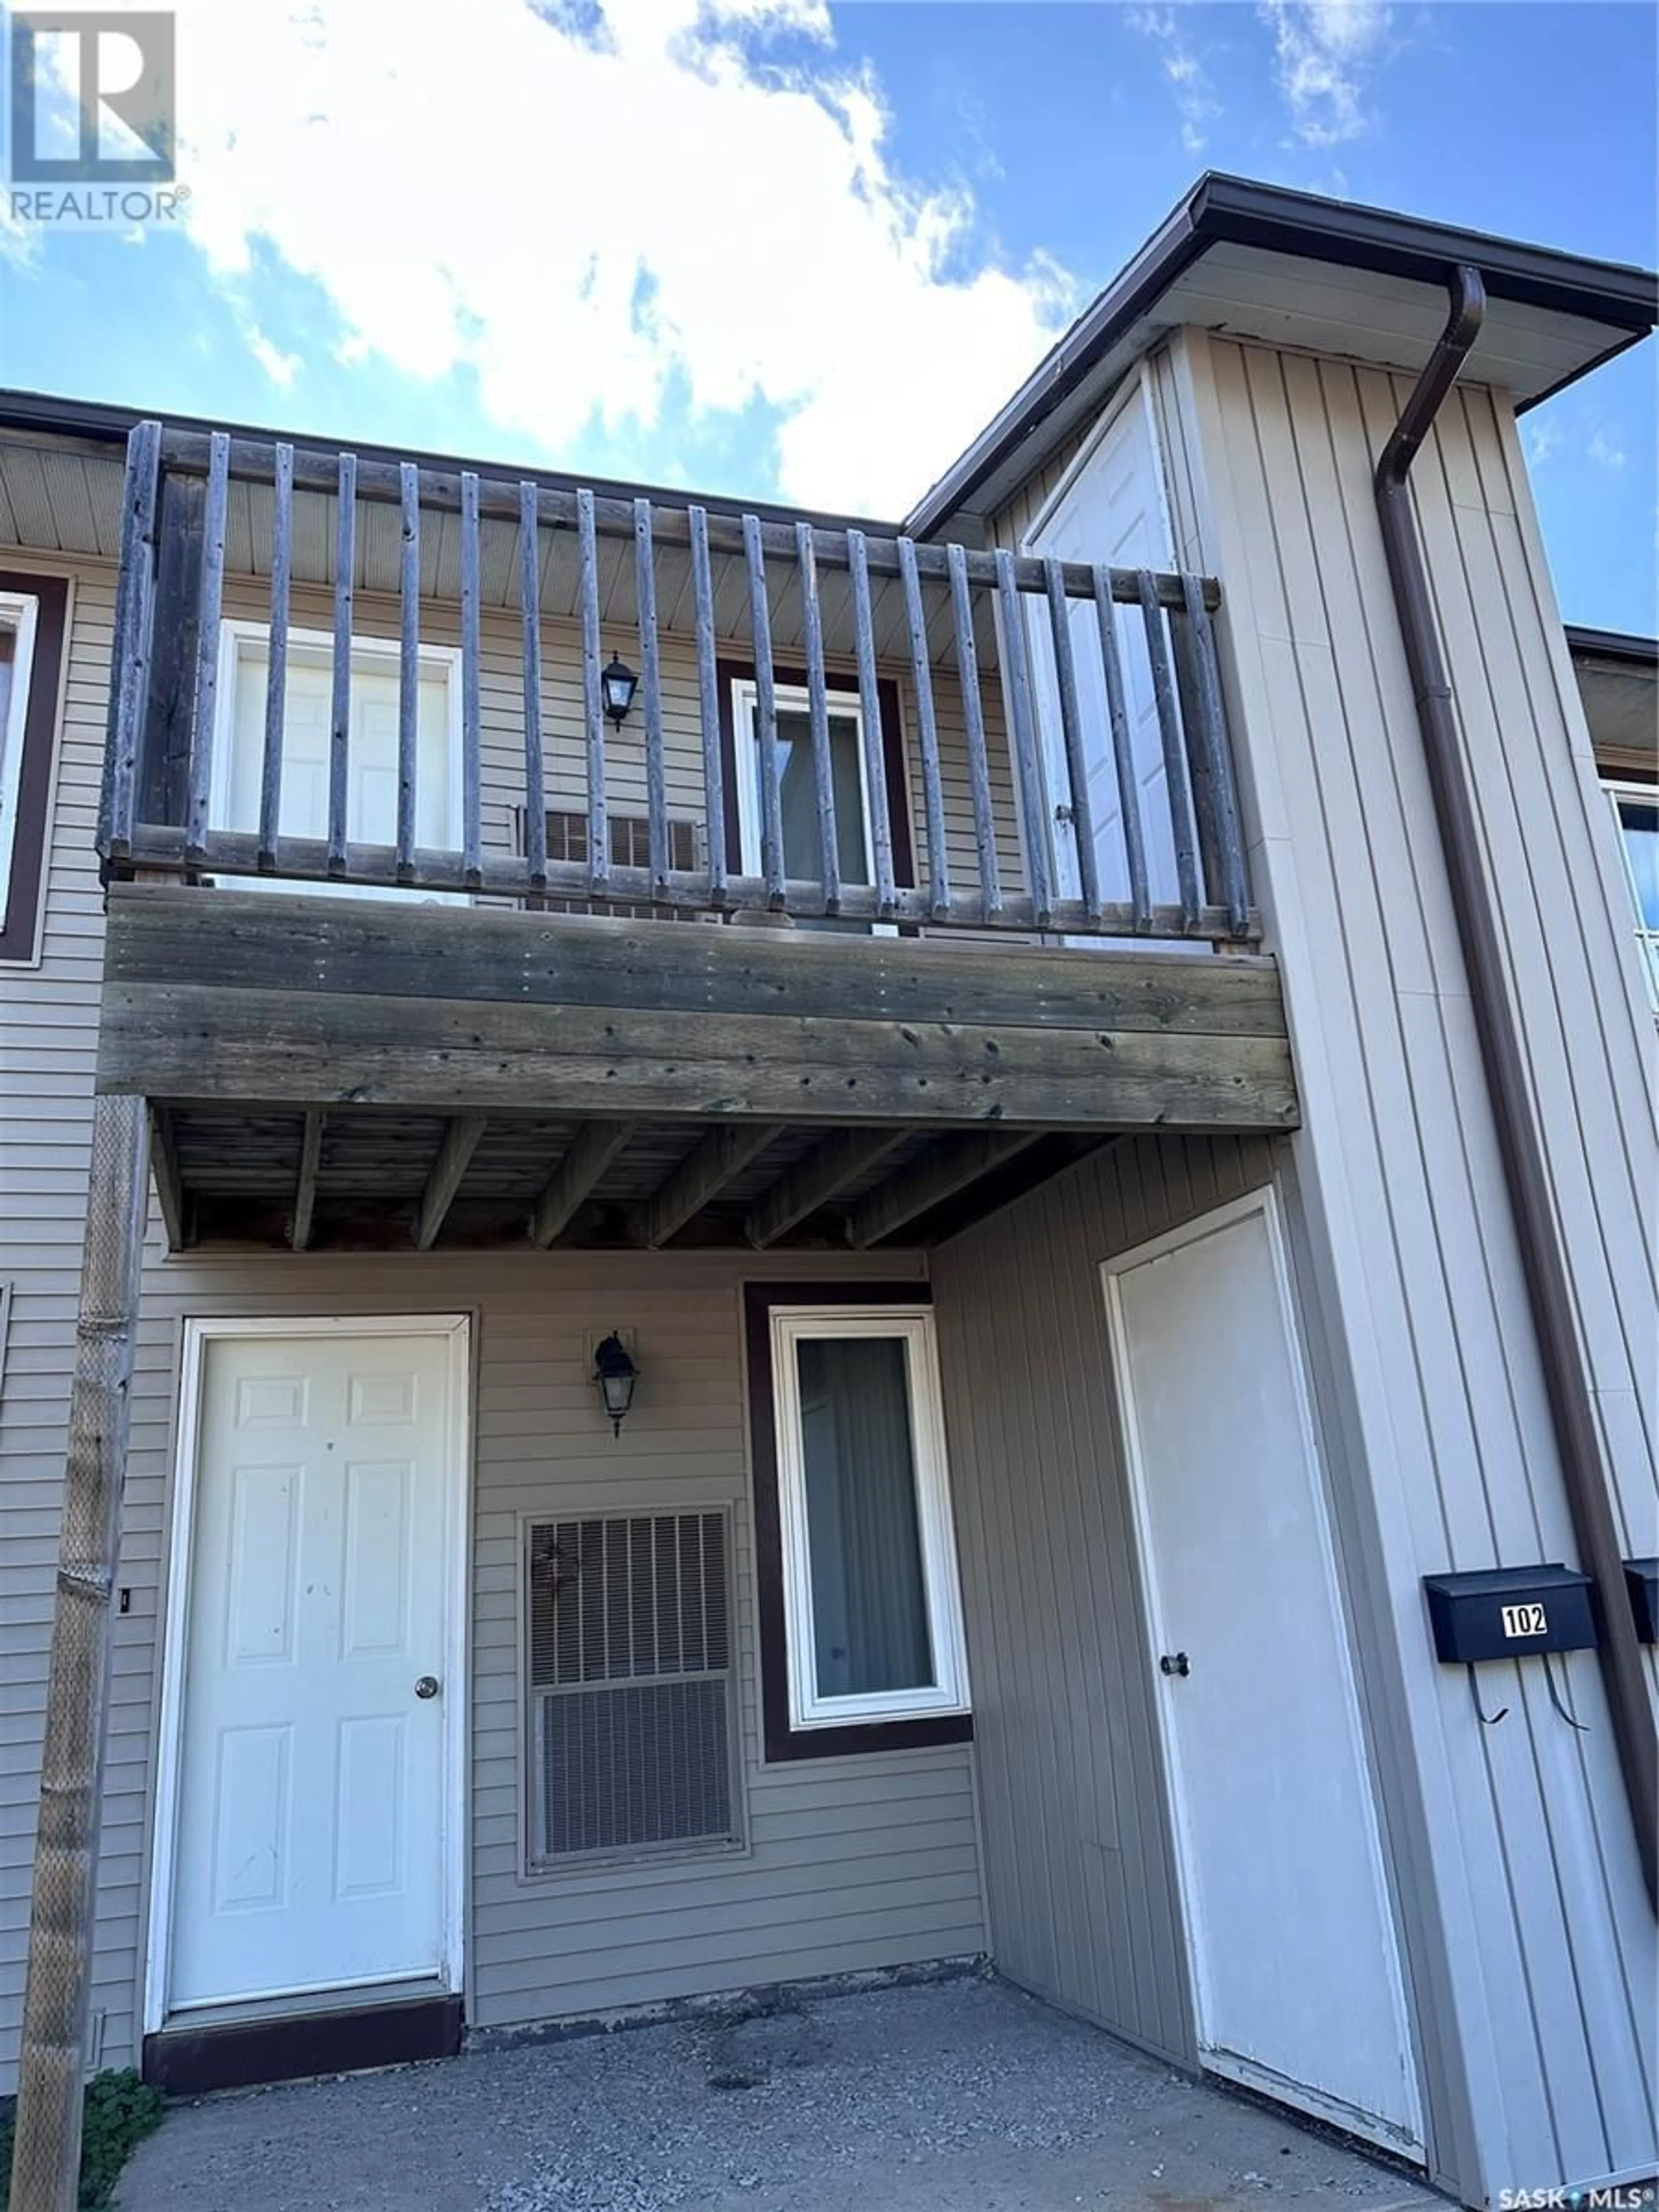 A pic from exterior of the house or condo for 202 525 Dufferin AVENUE, Estevan Saskatchewan S4A2J1